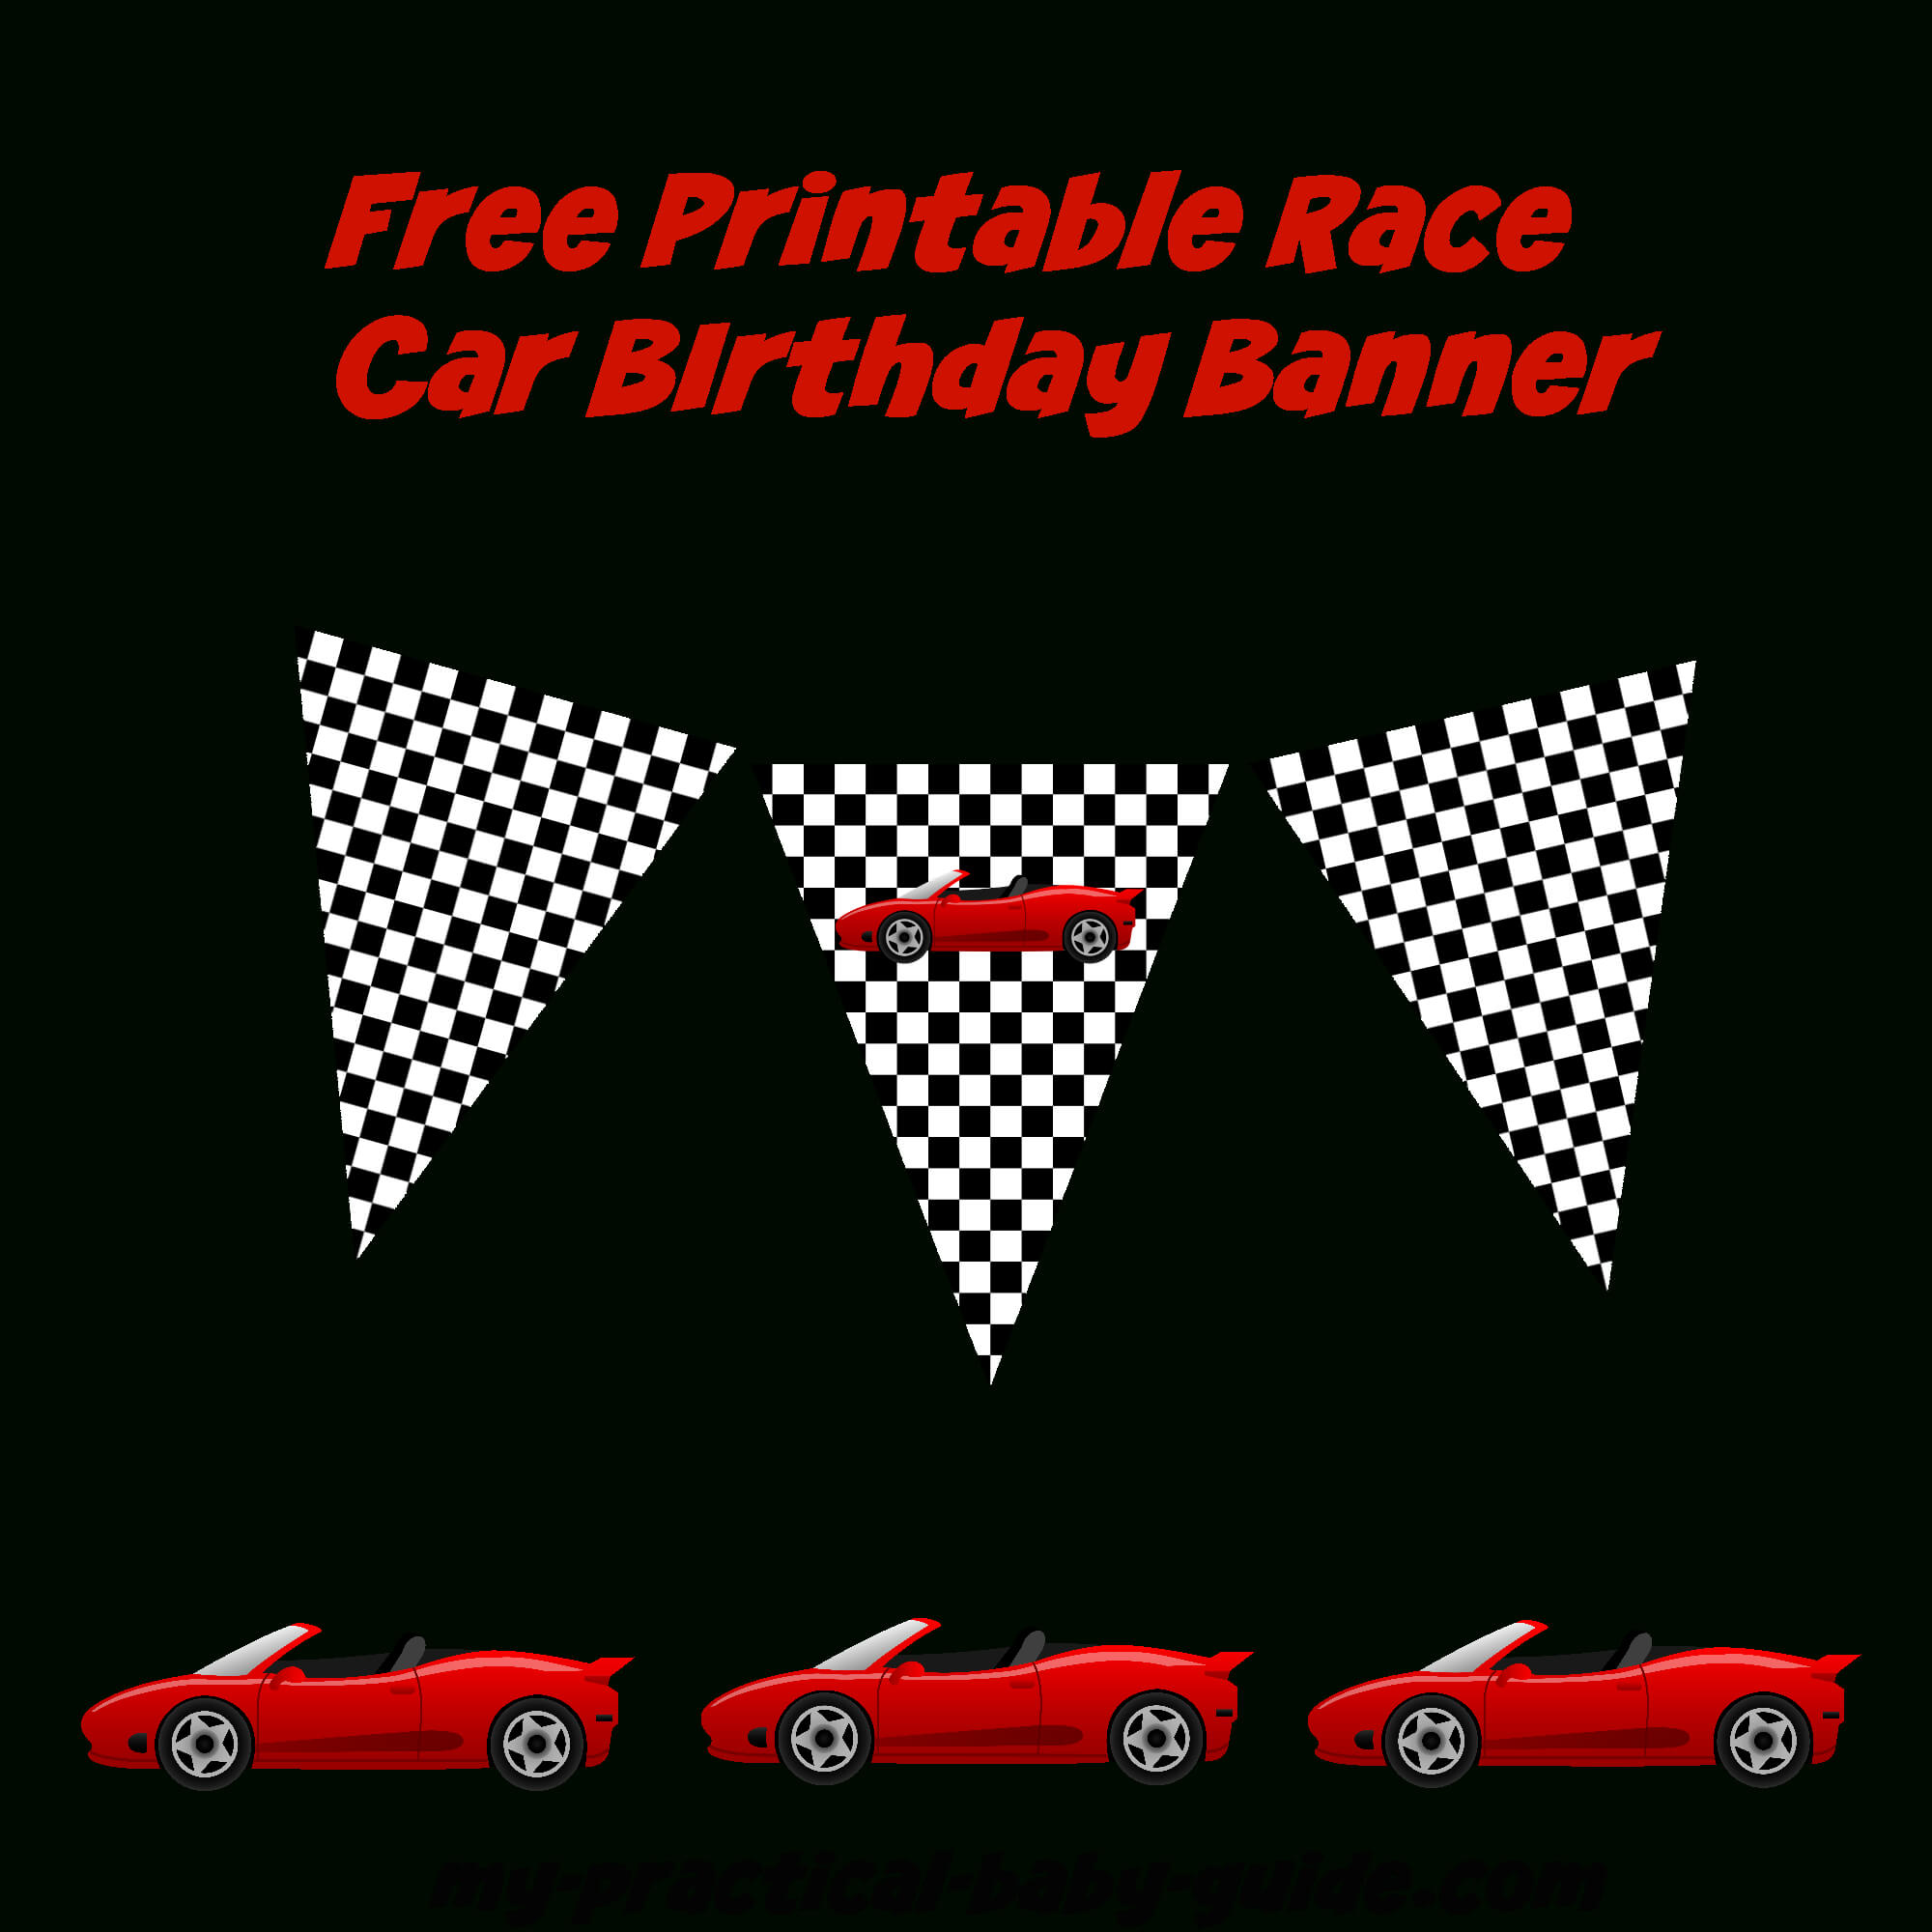 Use This Free Printable Race Car Birthday Banner And In Cars Birthday